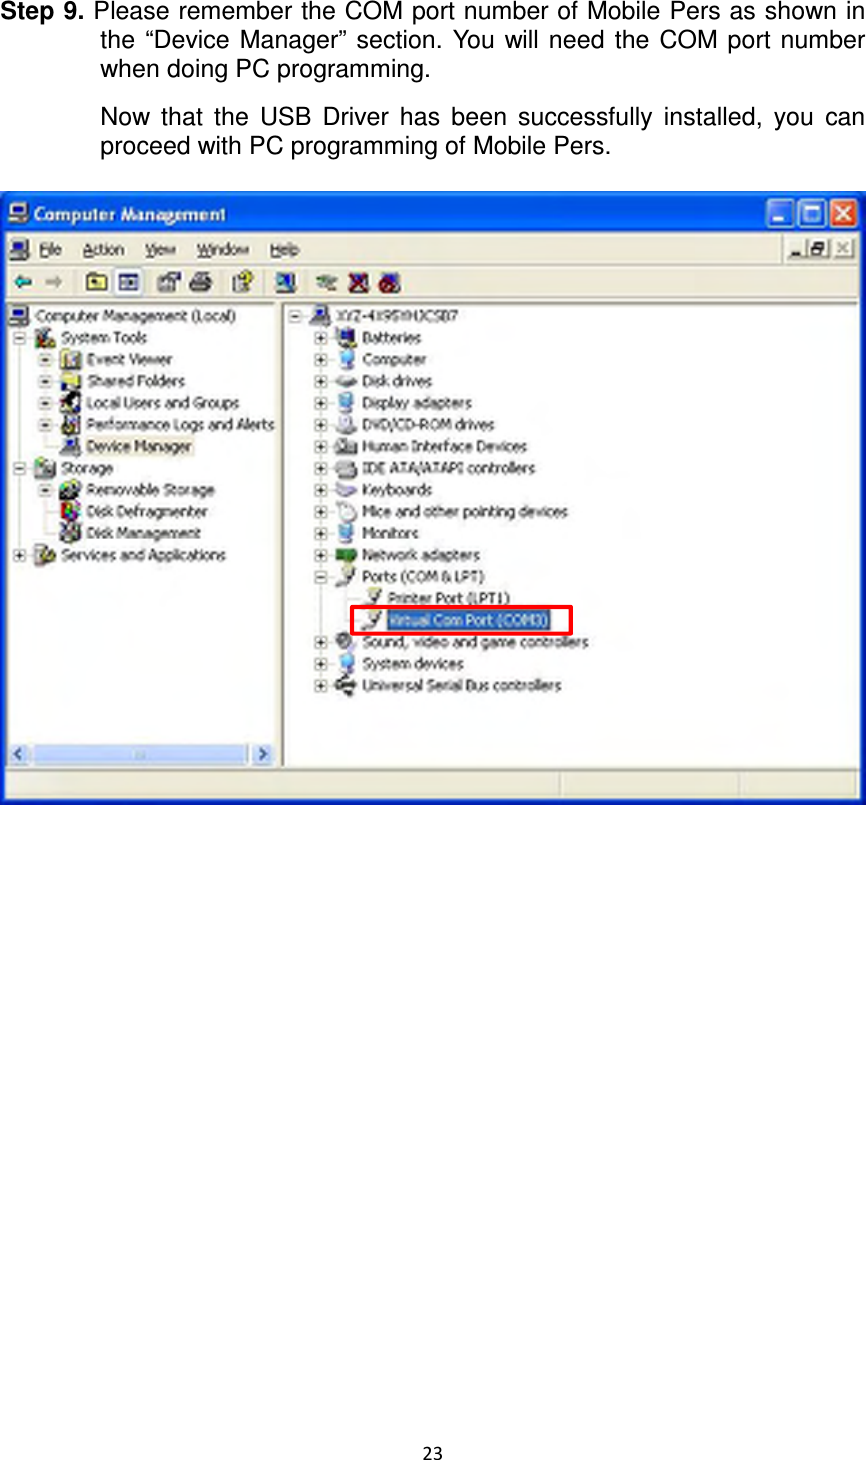 23  Step 9. Please remember the COM port number of Mobile Pers as shown in the  “Device  Manager”  section.  You  will need  the  COM  port  number when doing PC programming.   Now  that  the  USB  Driver  has  been  successfully  installed,  you  can proceed with PC programming of Mobile Pers.                  